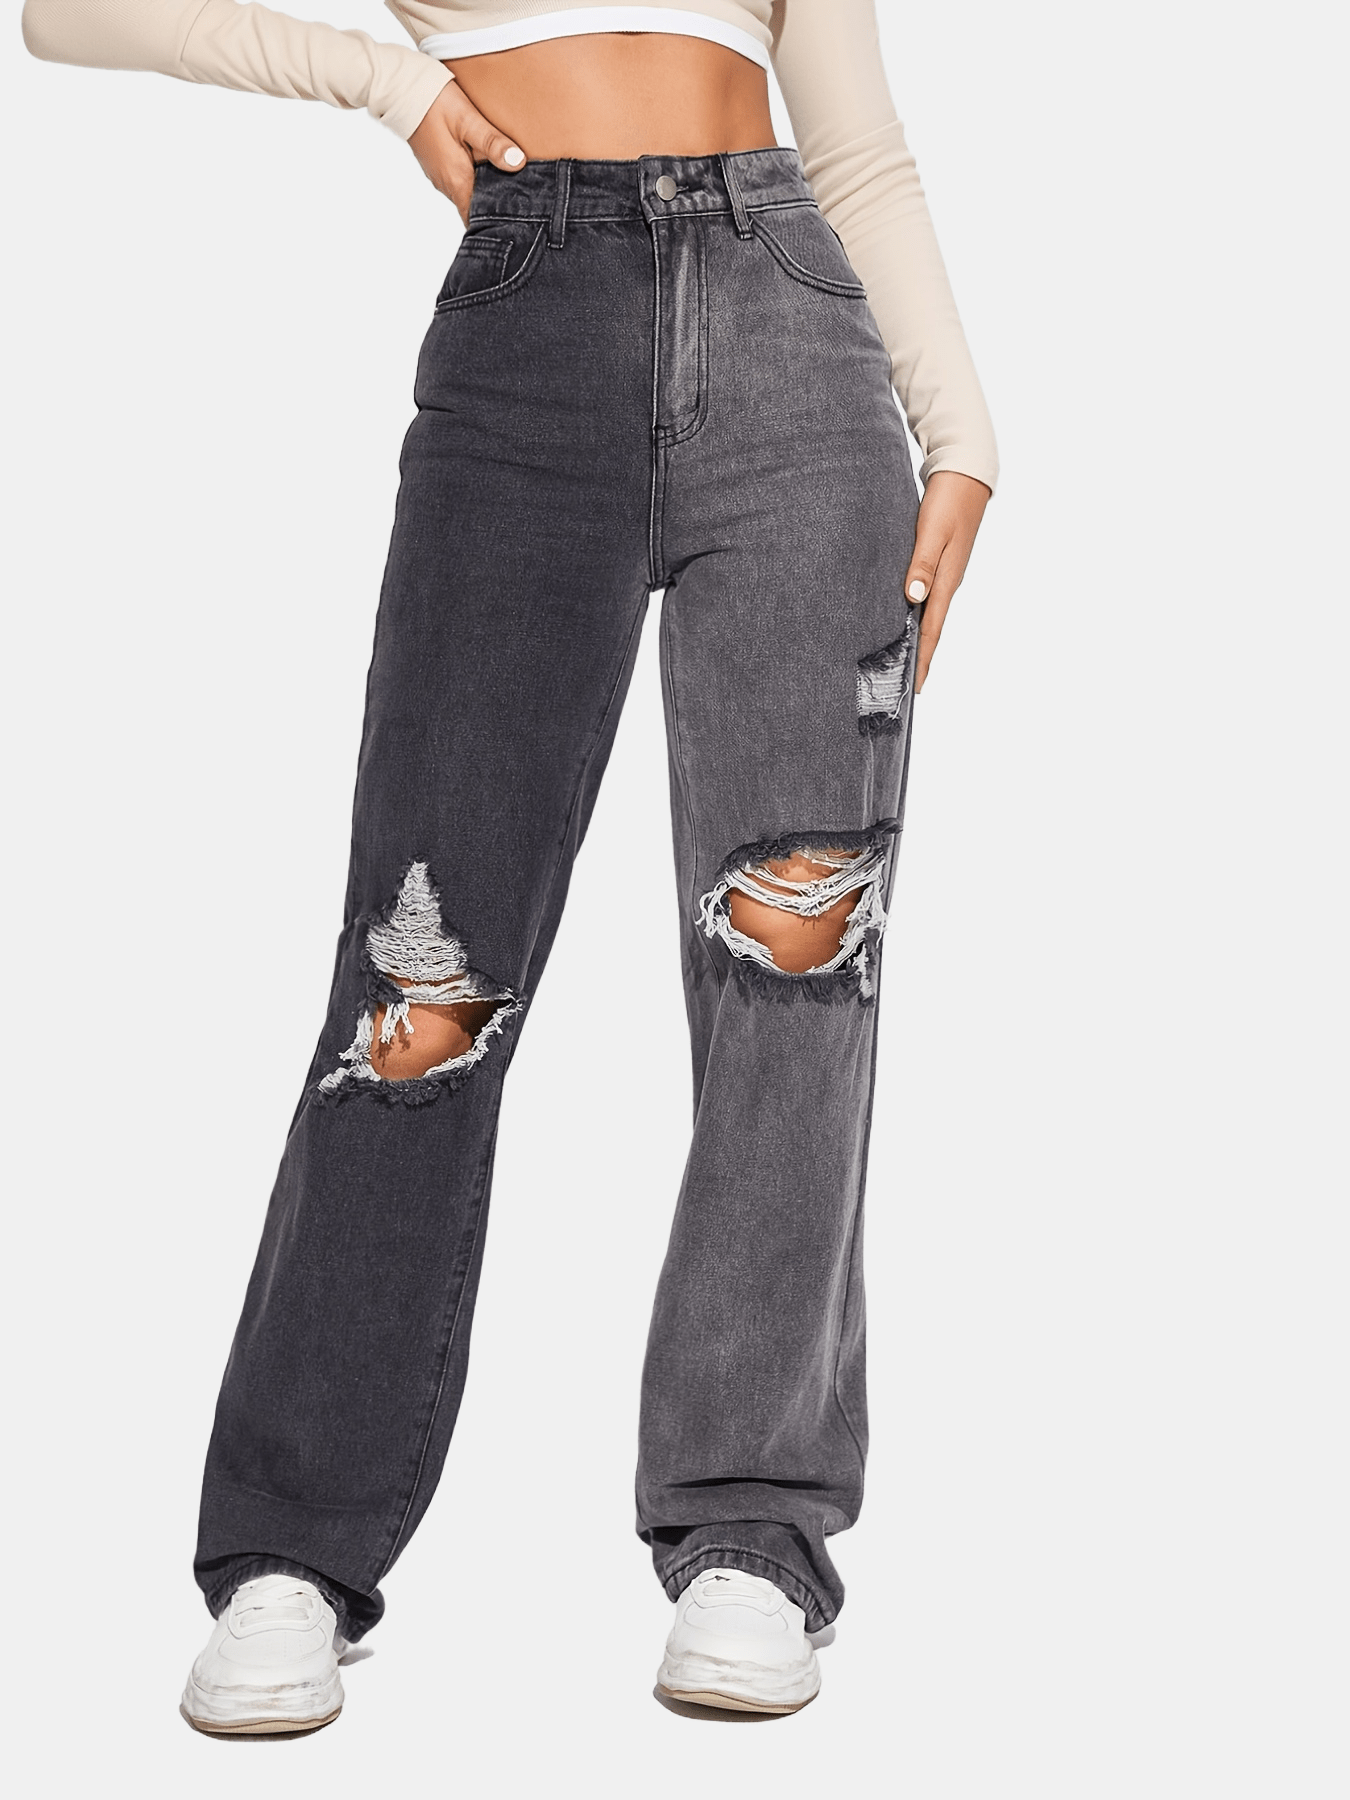 Two Tone Ombre Ripped Denim Pants, Ripped Holes Wide Leg Baggy Jeans ...